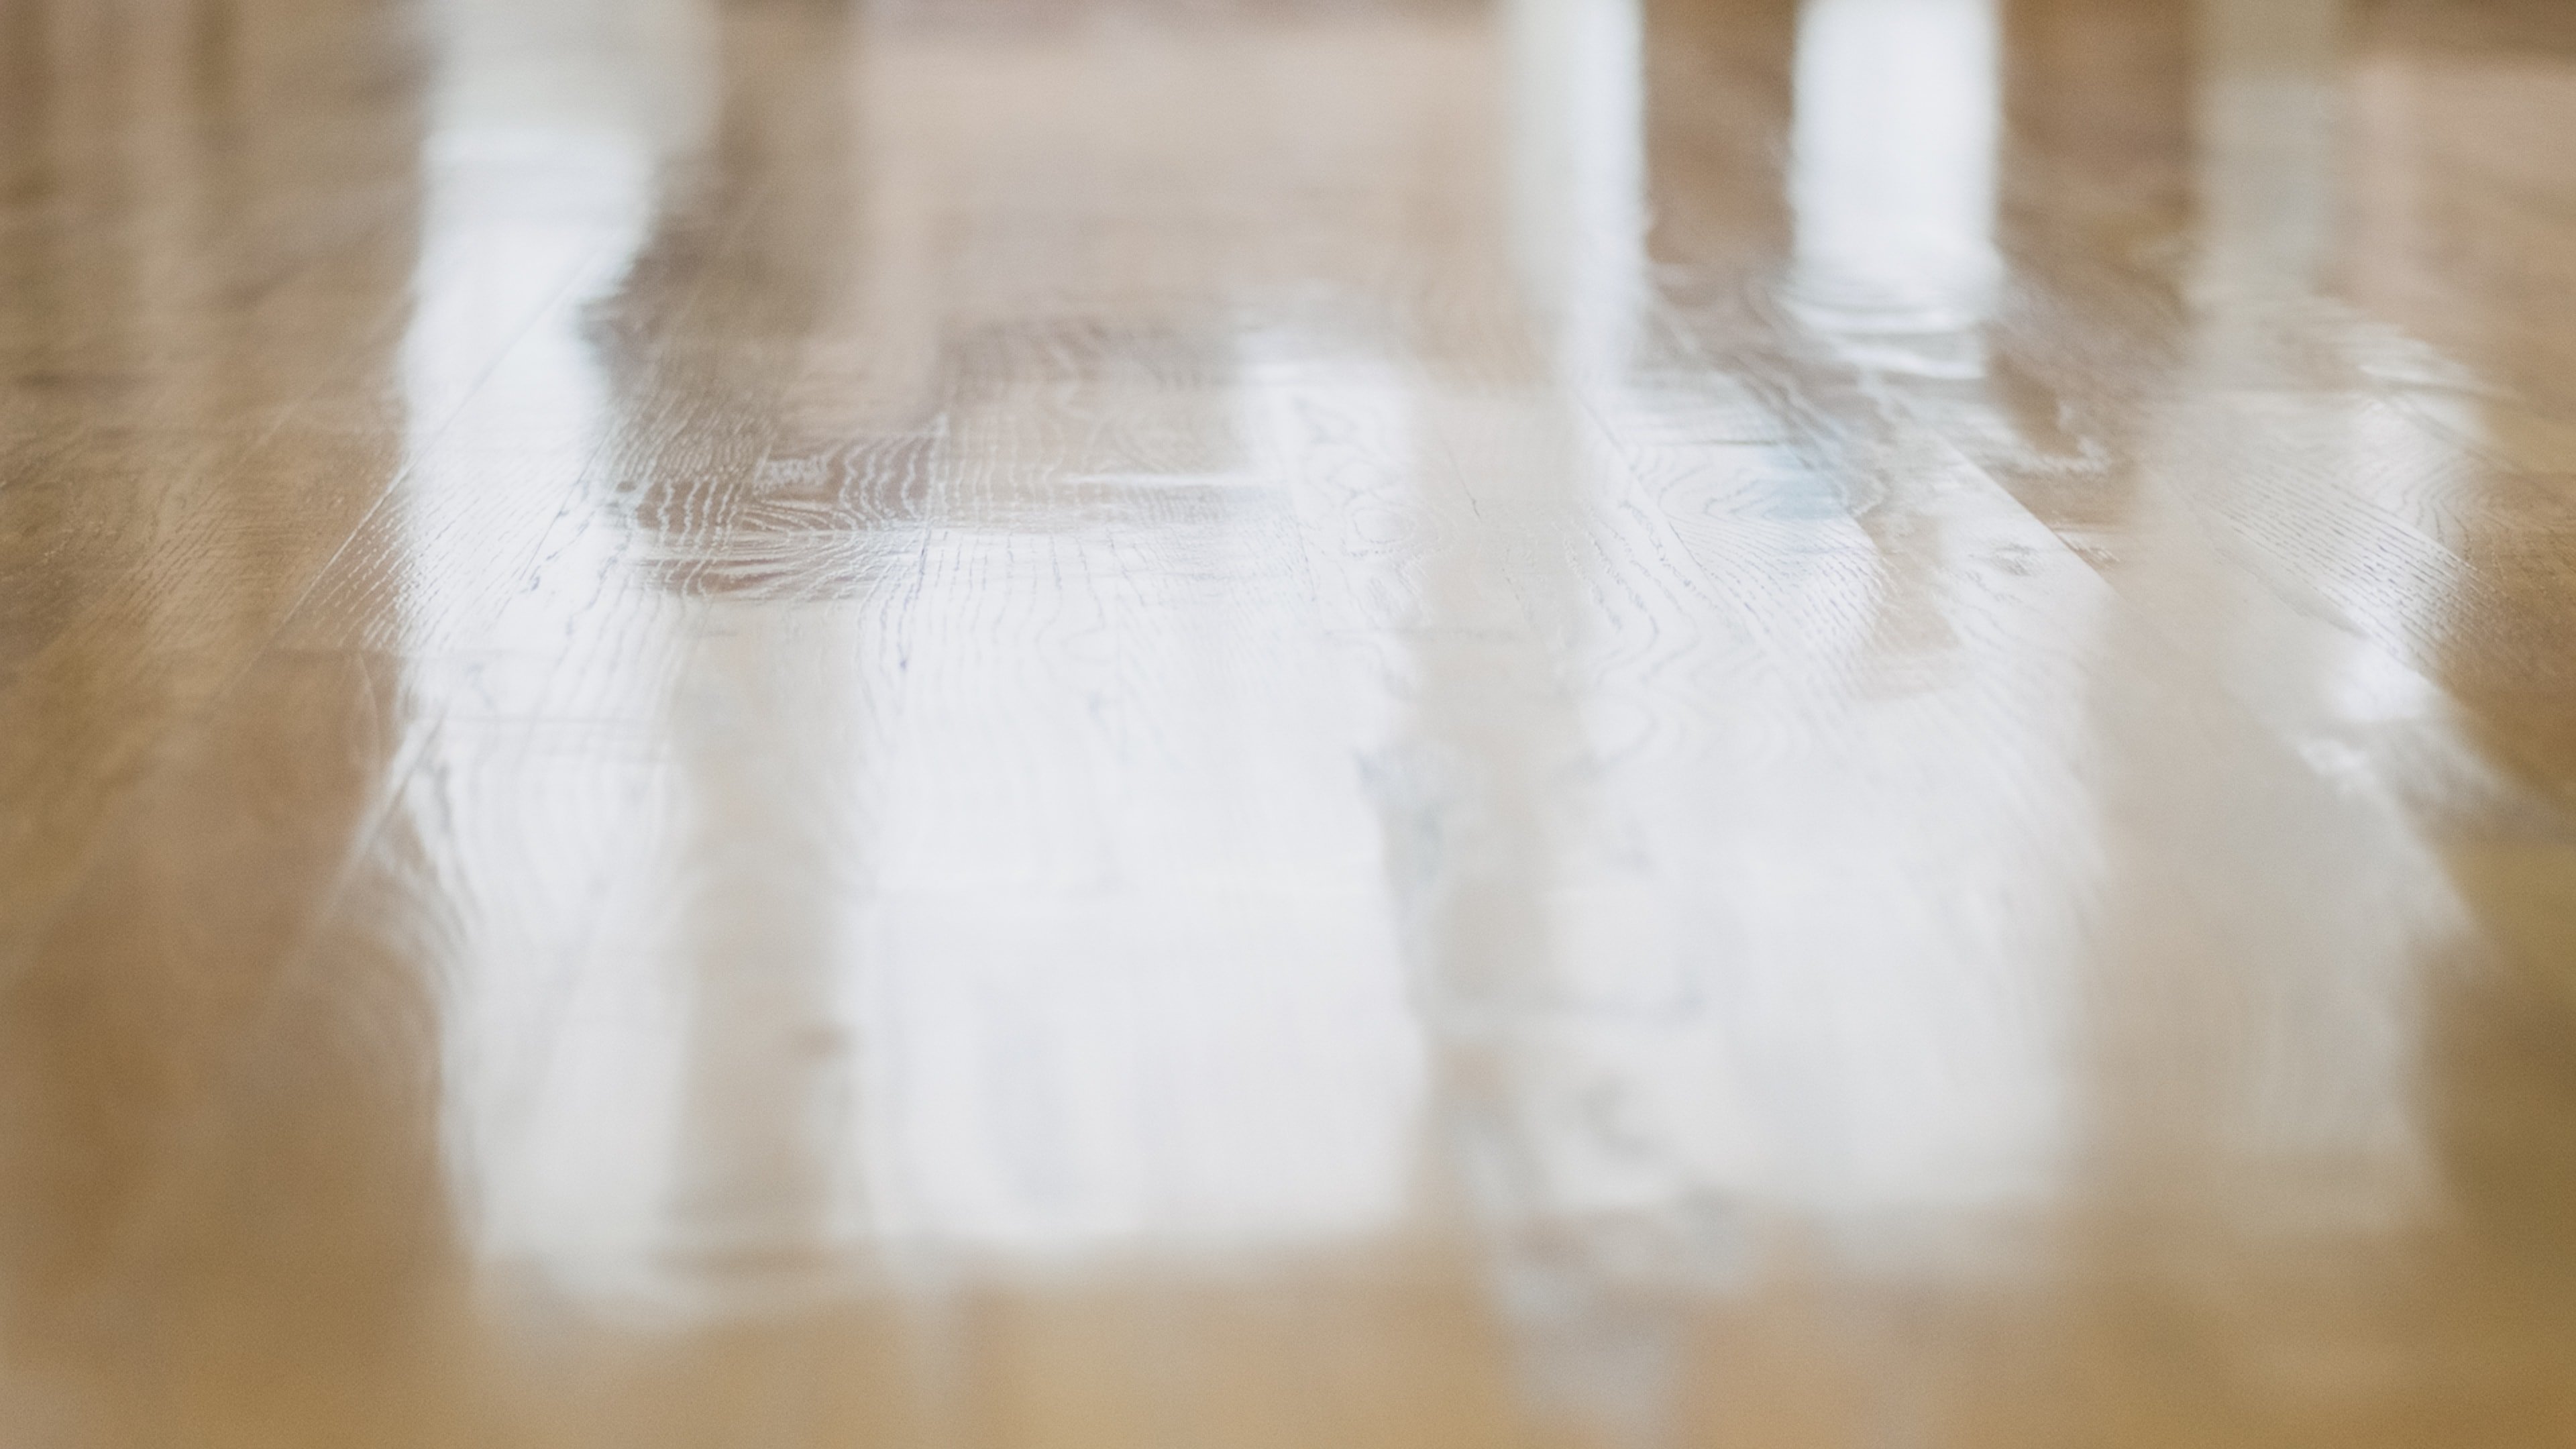 Five Ways to Fake Wood Flooring - My Four and More